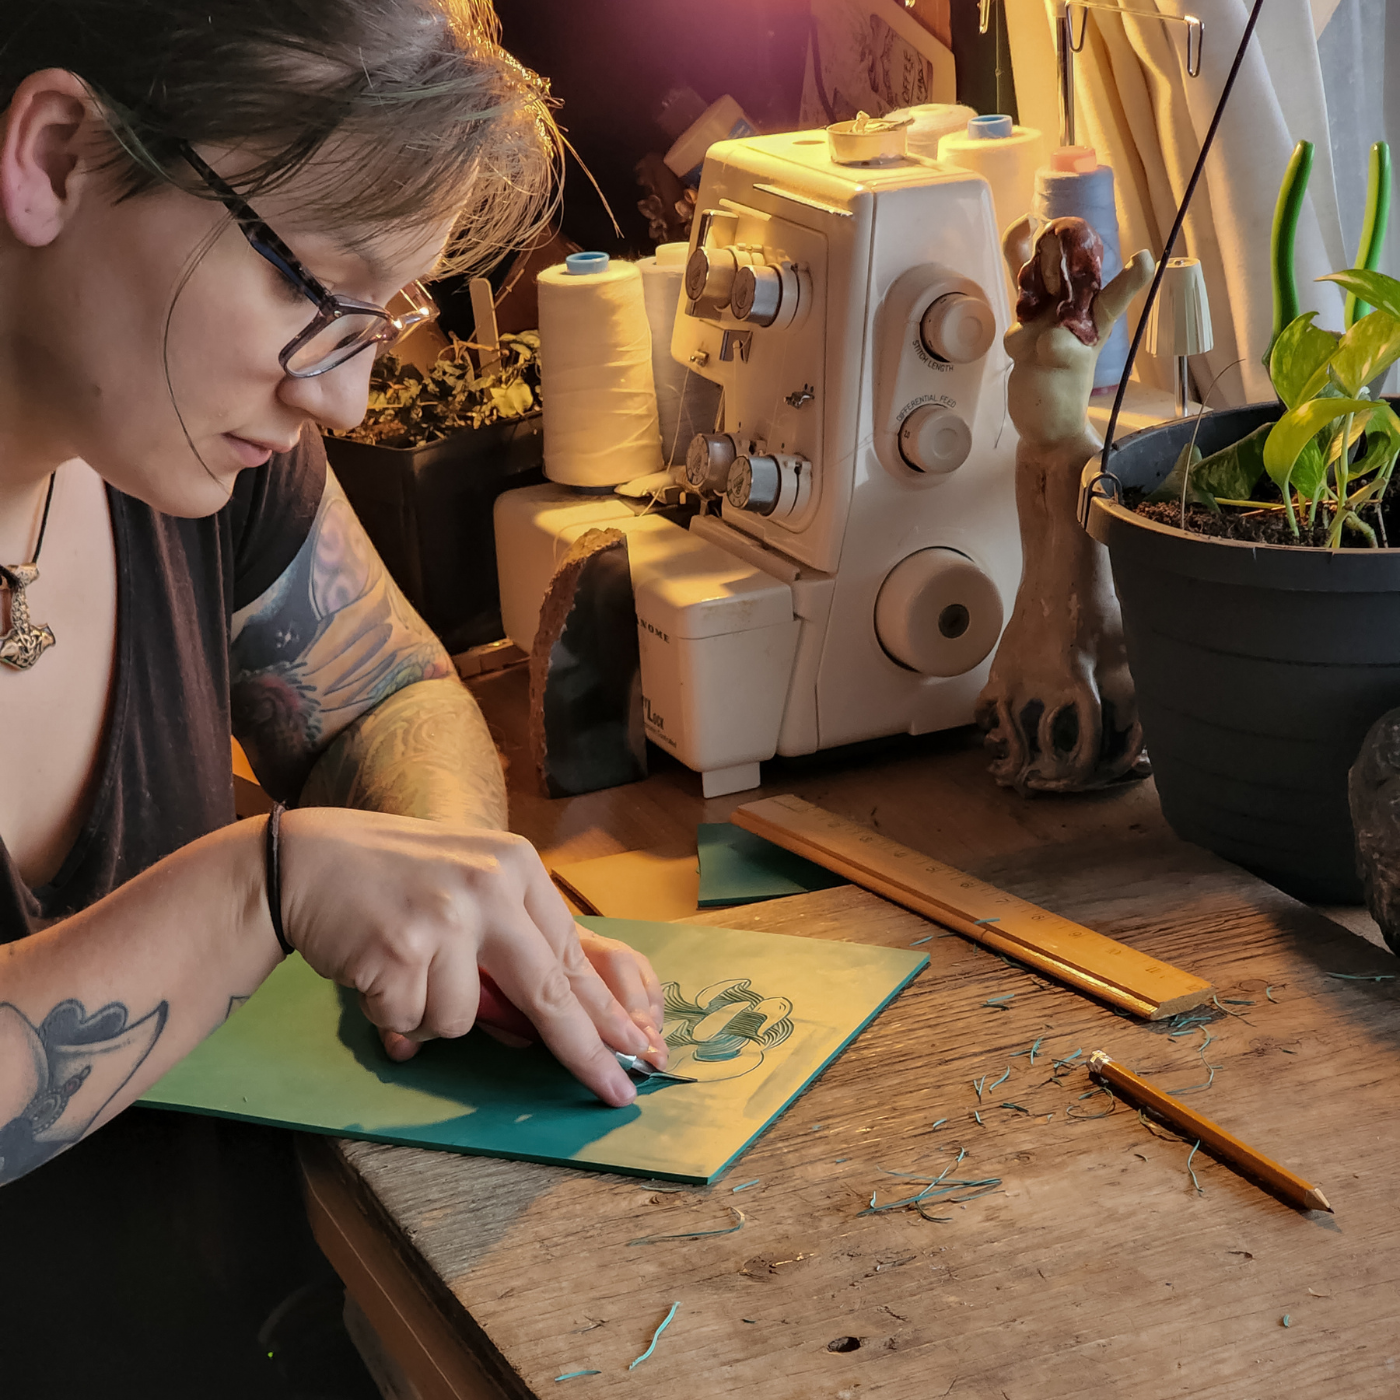 Sheena is leaning over a wooden table handcarving a stamp. A white serger, a dark green planter with leaves coming out of it, a wooden ruler and a pencil are also on the table.